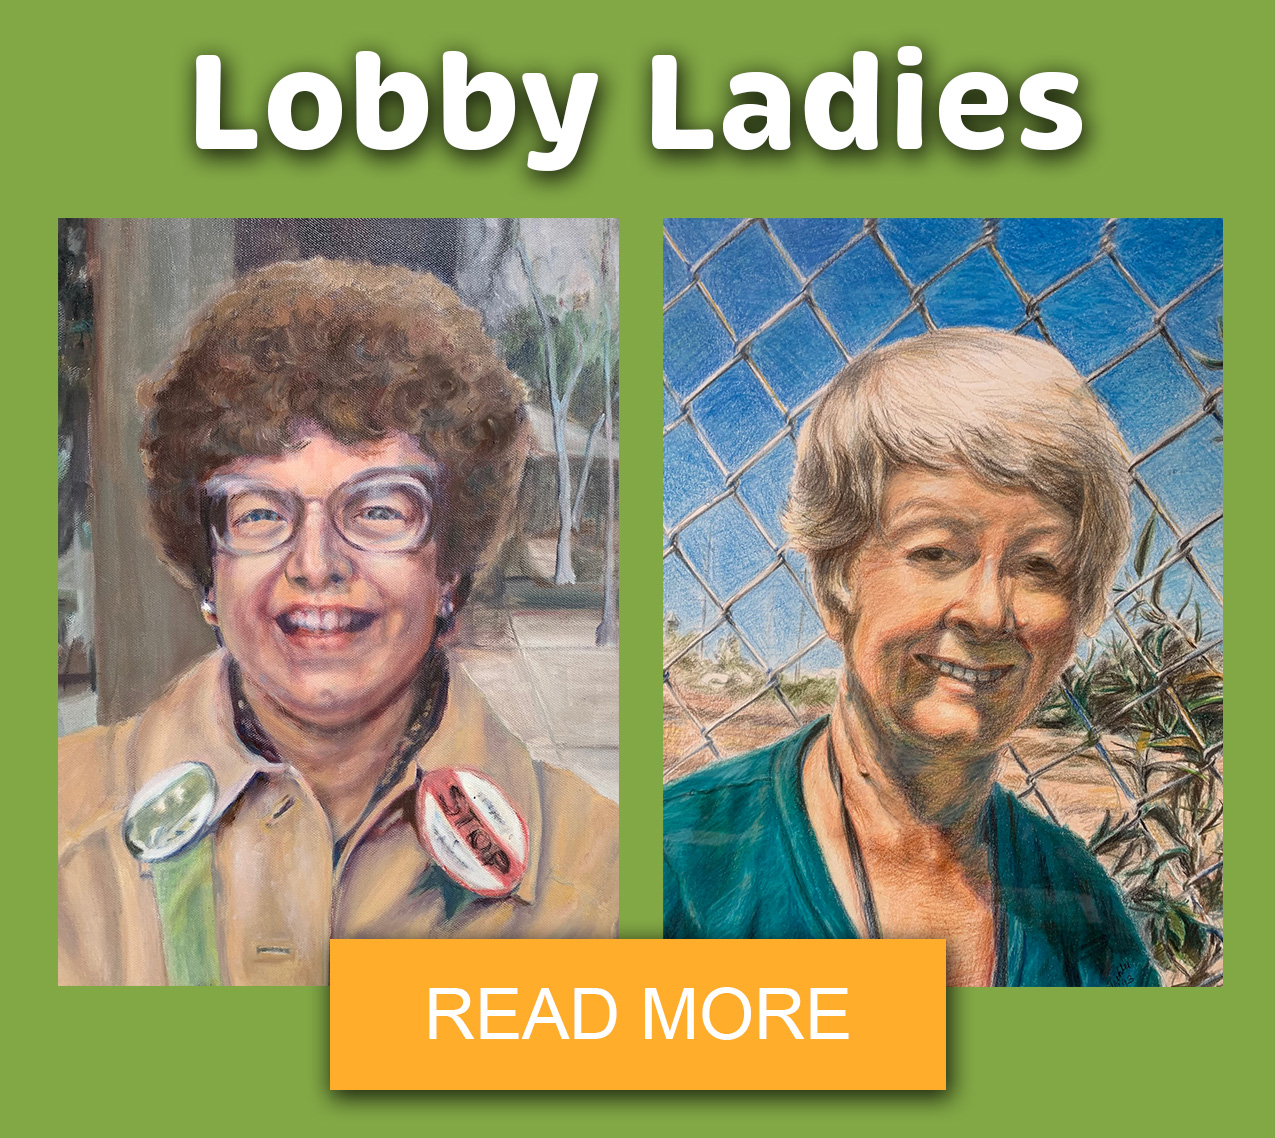 Who are the lobby ladies